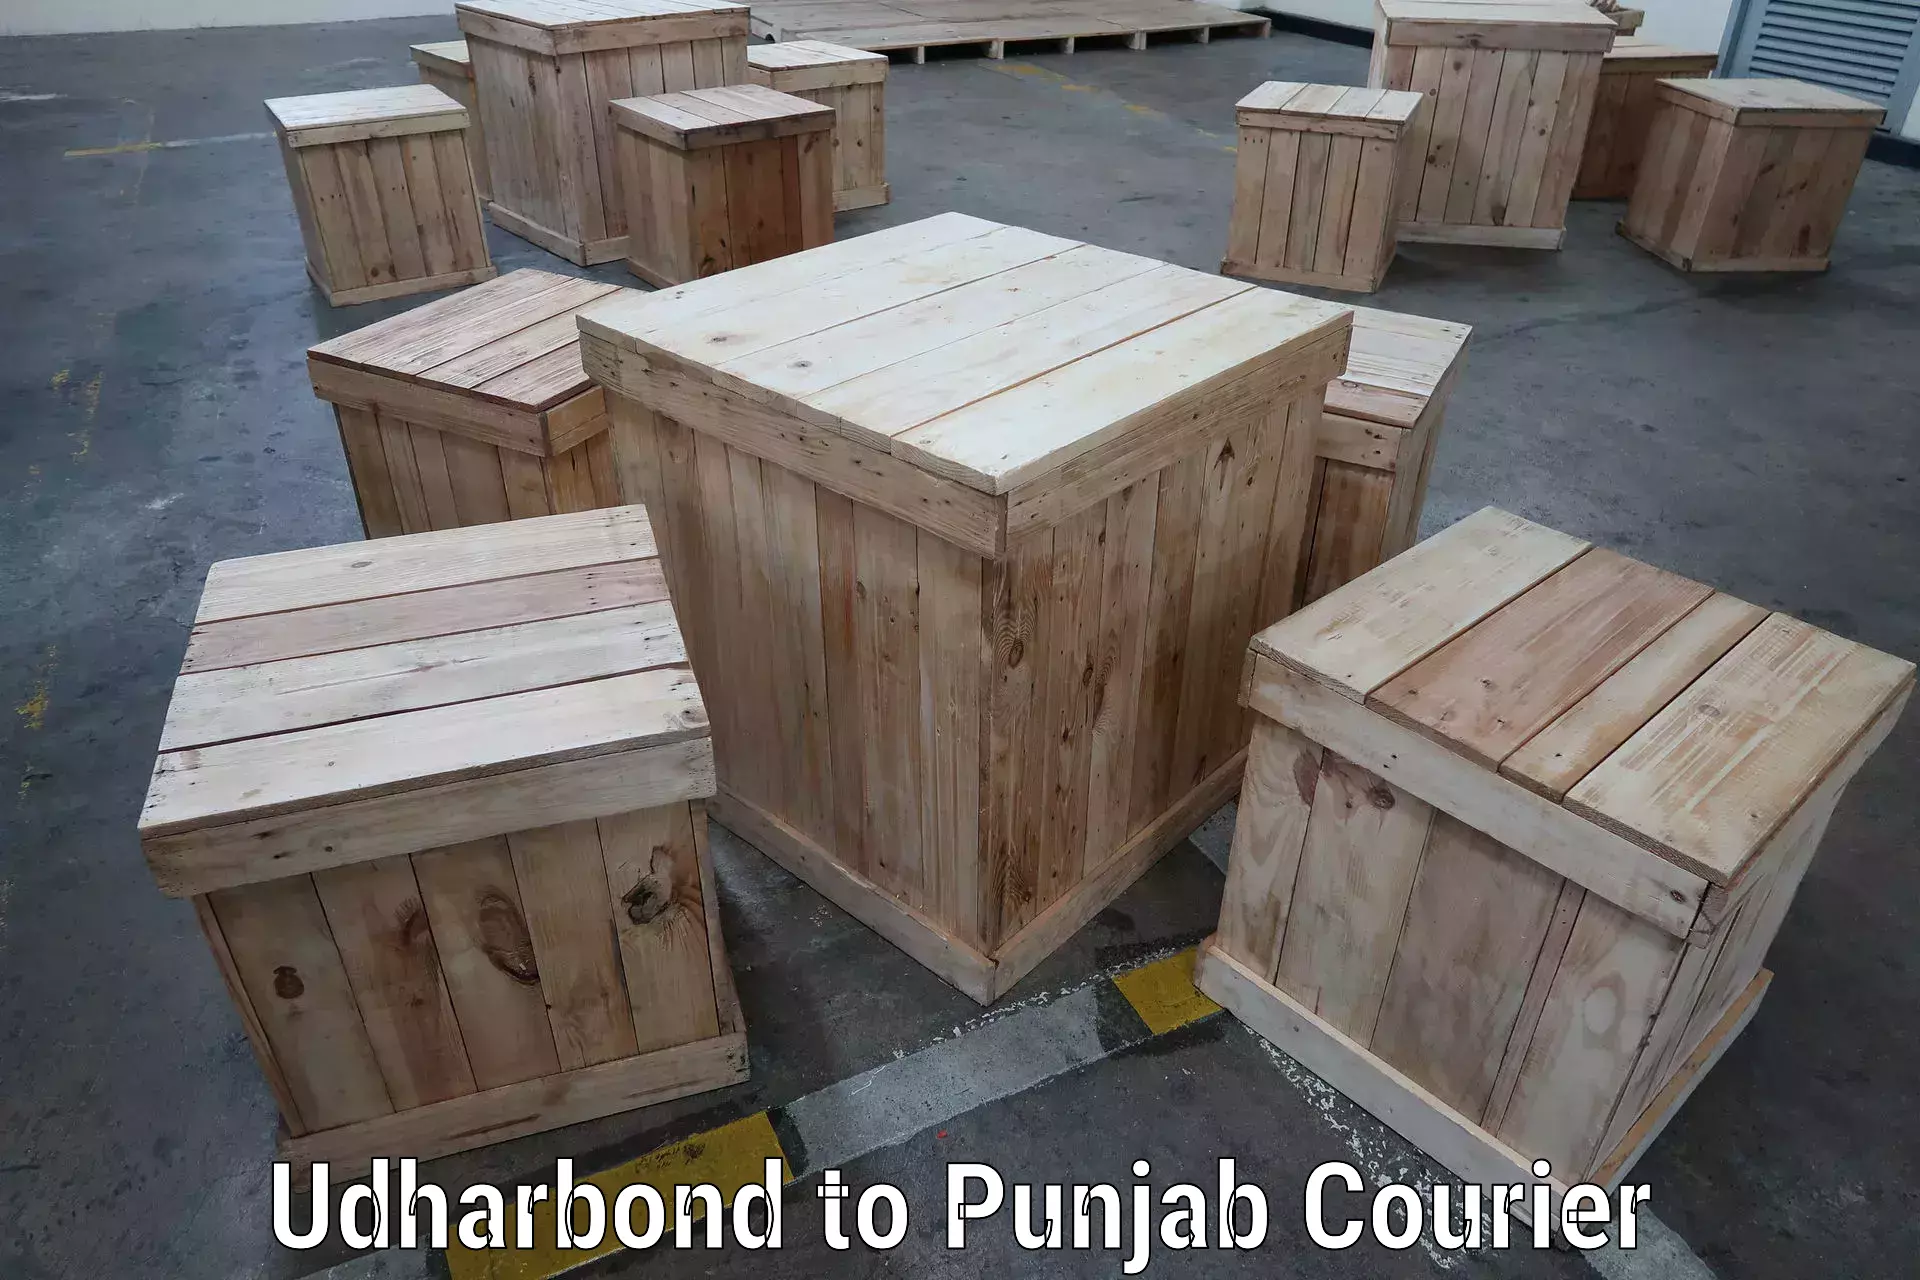 Same-day delivery solutions in Udharbond to Punjab